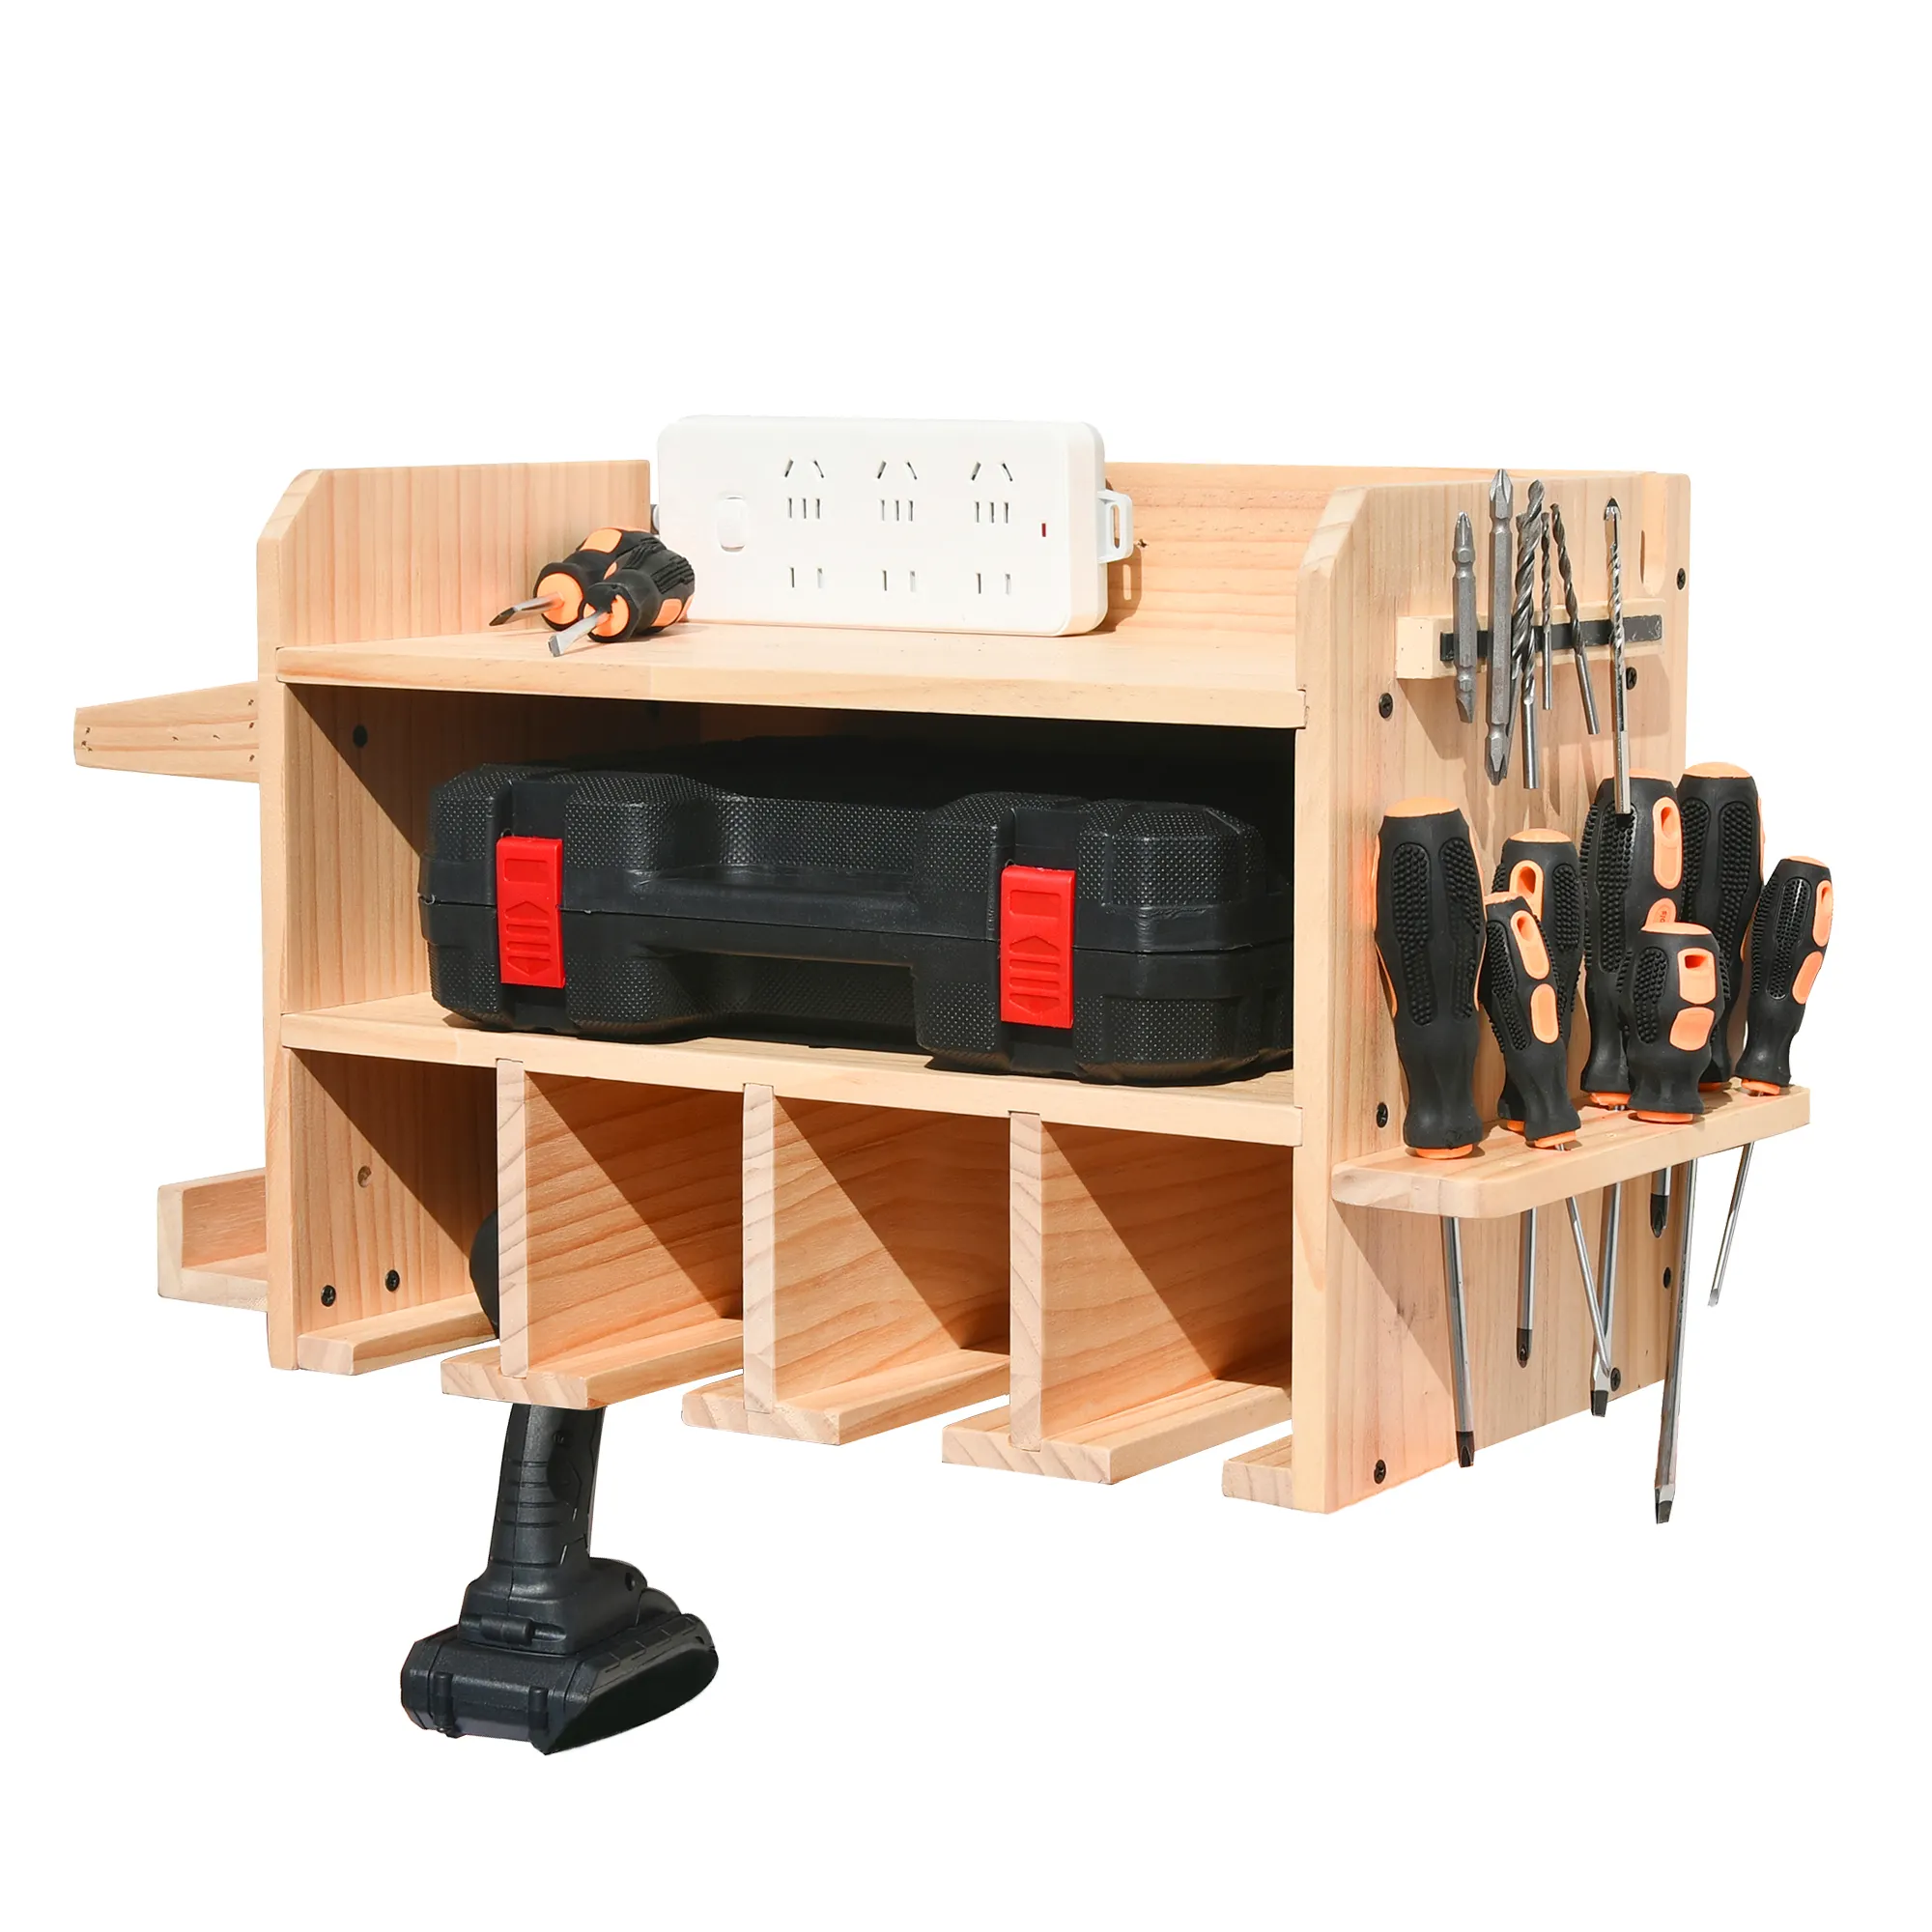 Heavy Duty Floating Power Tool Shelf Organizer Organizer Kitchen Gadgets Tool Rack Stand Holders Wall Hanger For Home Goods